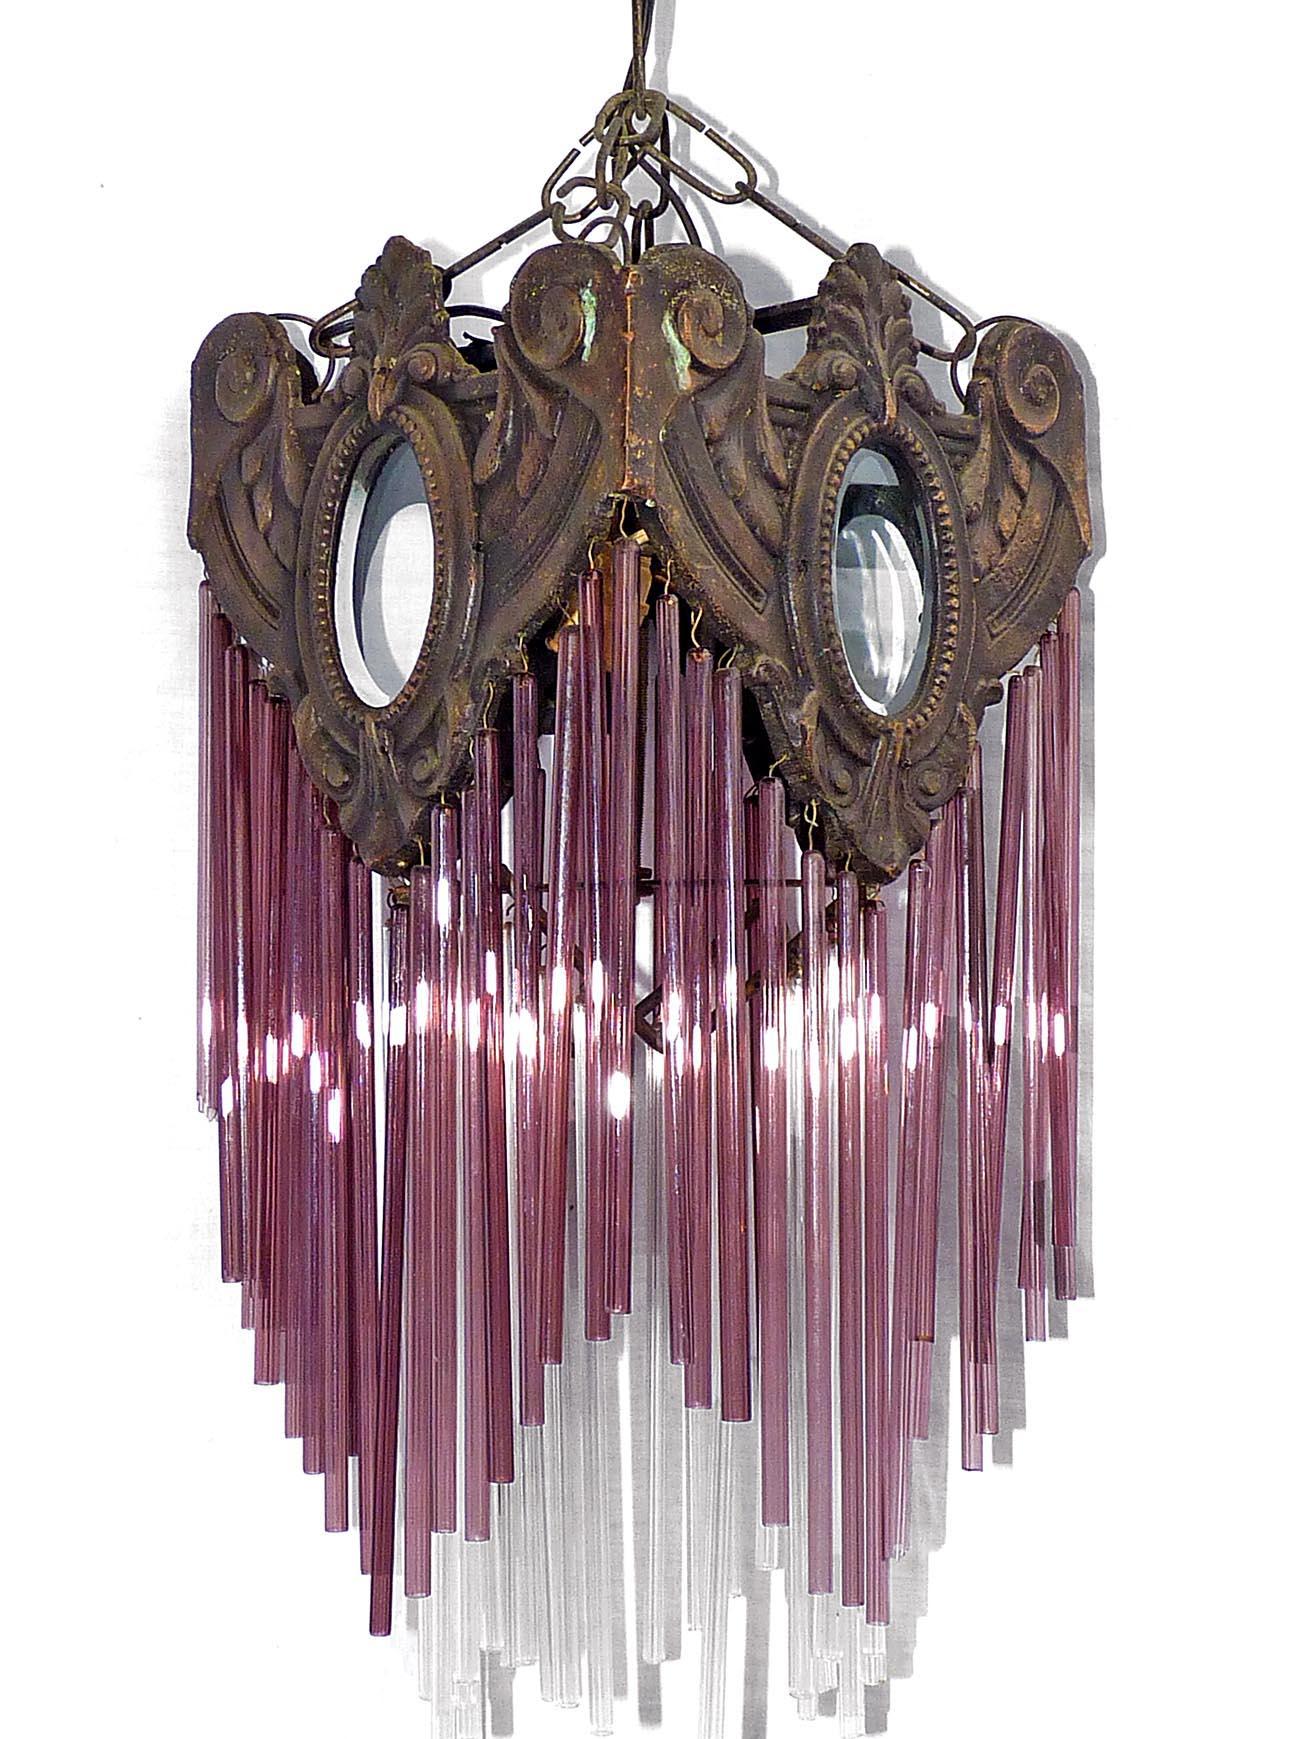 Beautiful antique French Art Nouveau Art Deco bronze lantern and purple and clear glass straw fringe, 2 tiers. Age patina,
Measures:
Depth 7.8 in /20 cm
Width 7.8 in /20 cm
Diagonal 10.6 in/ 27 cm
Height 39.3 in (19.6 in + 19.6 in/chain) / 100